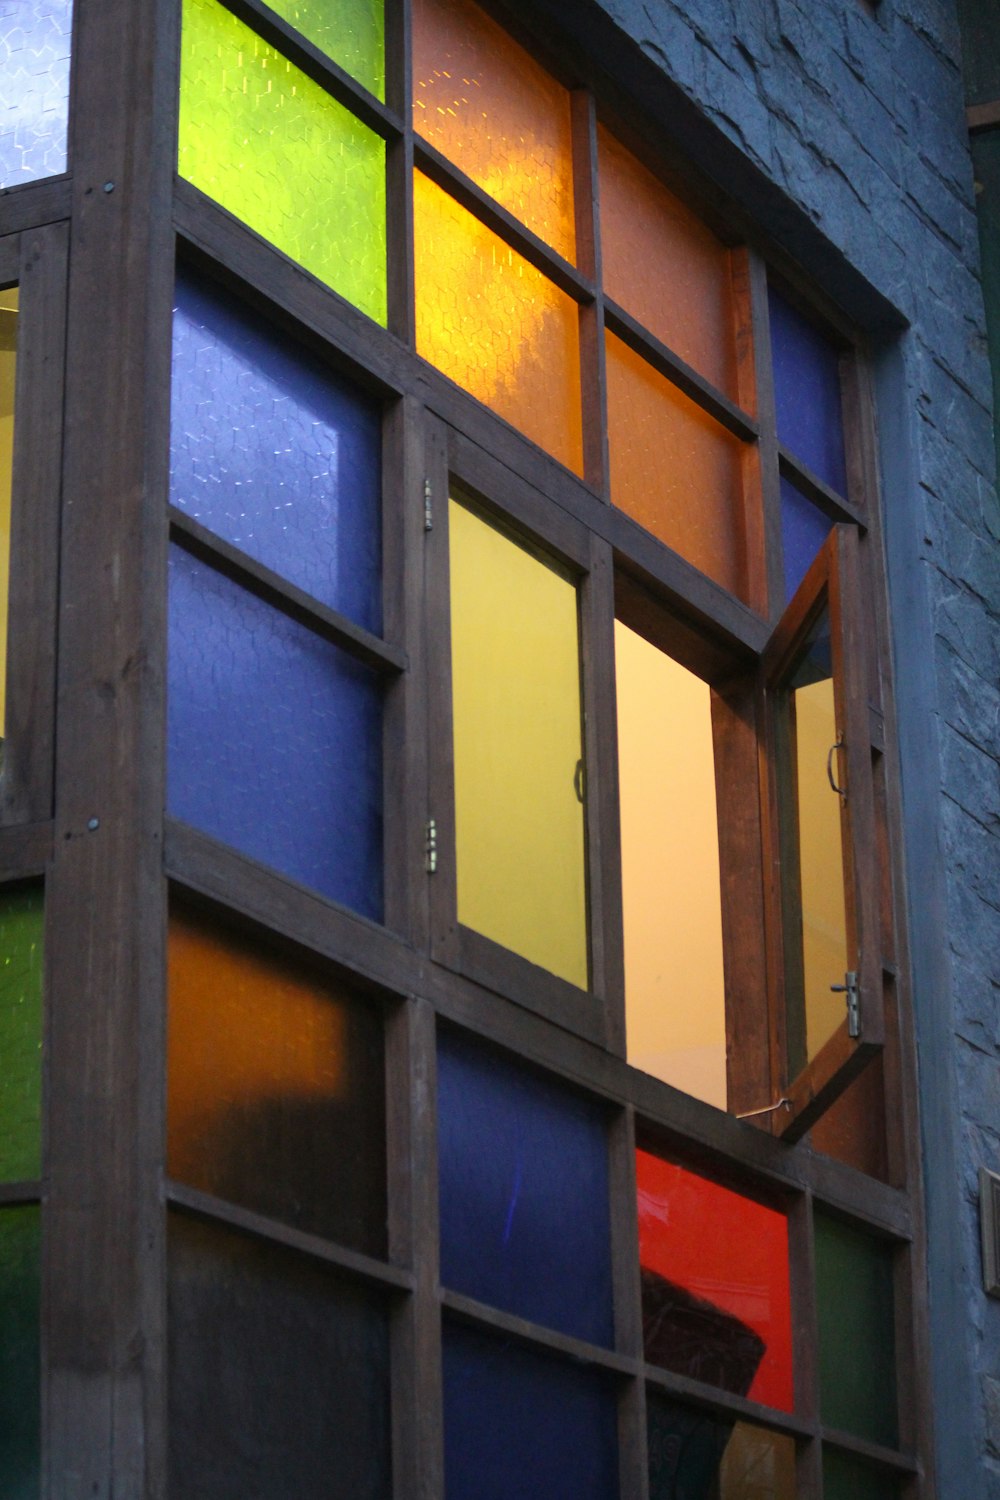 a multicolored window with a brick building in the background